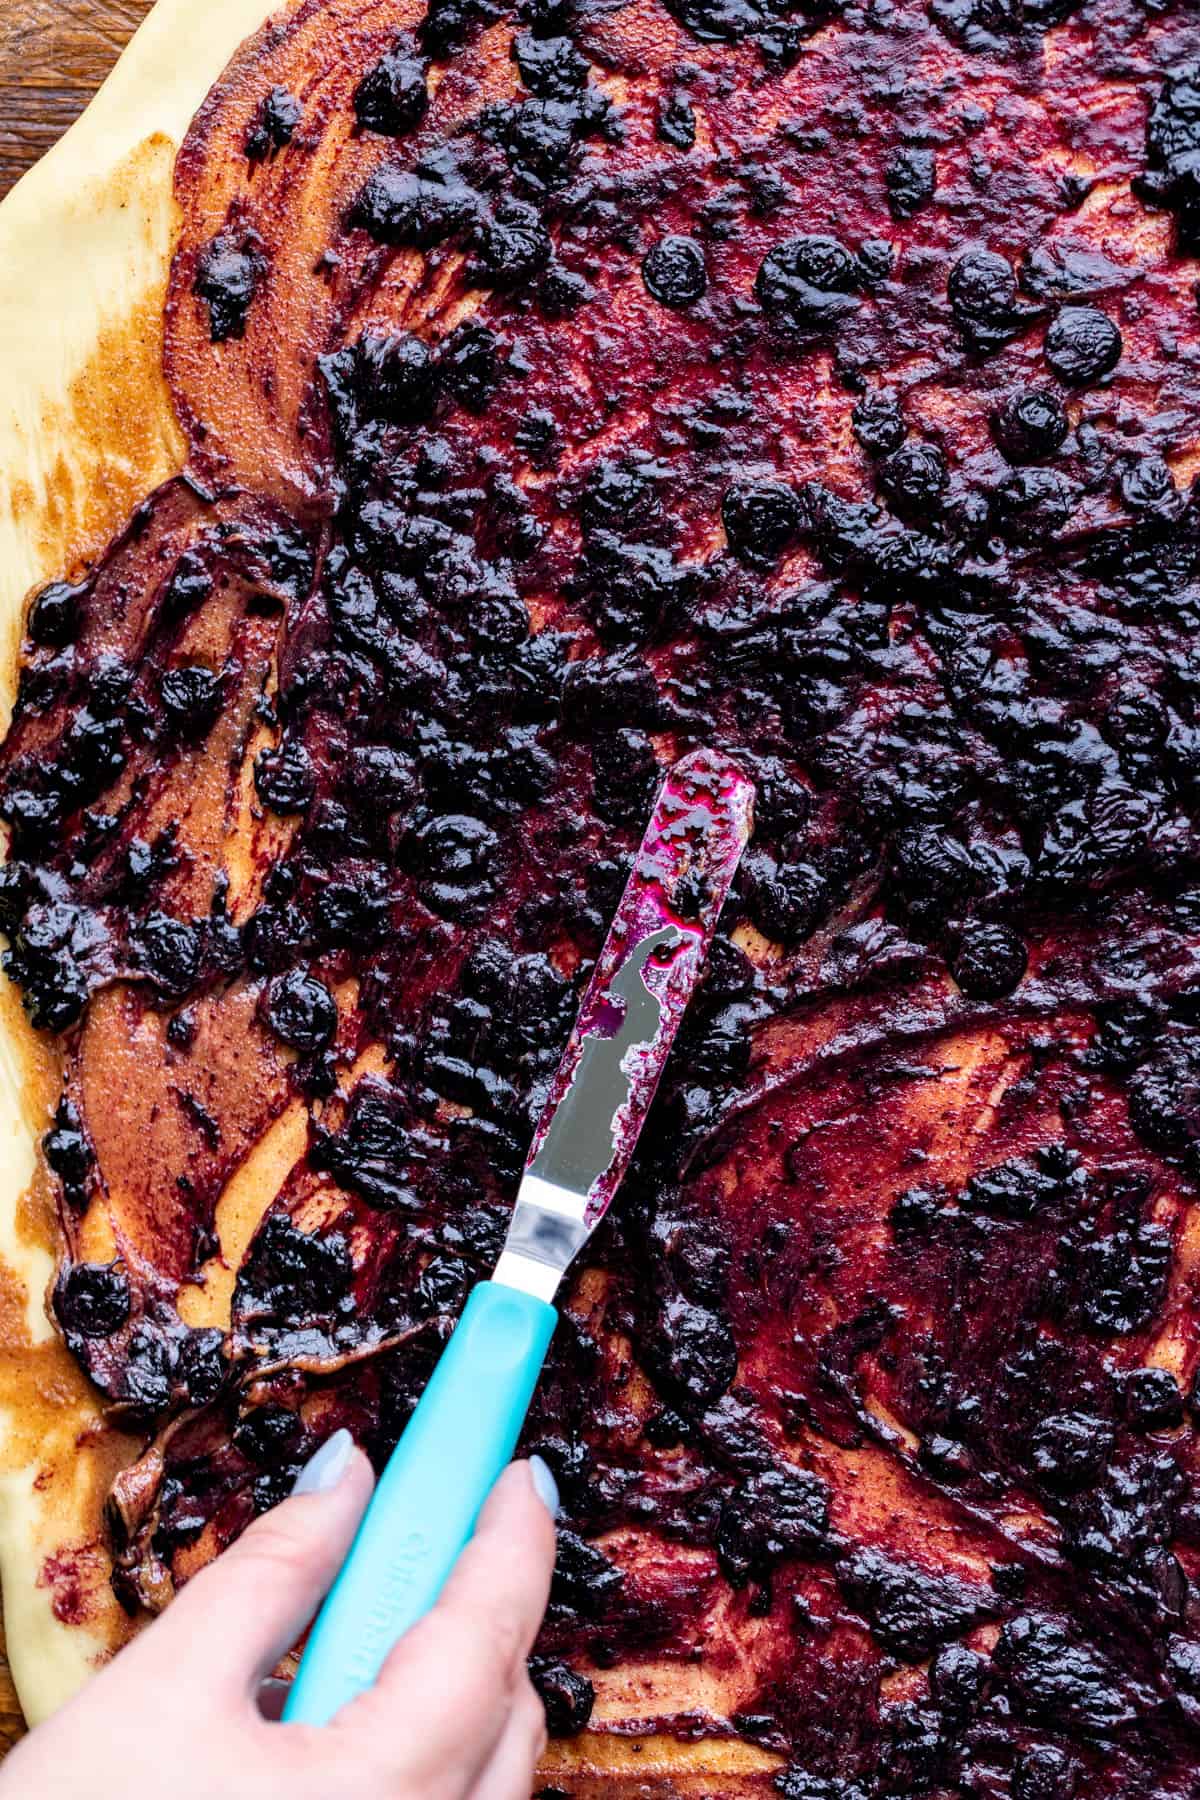 Blueberry jam on top of the dough.